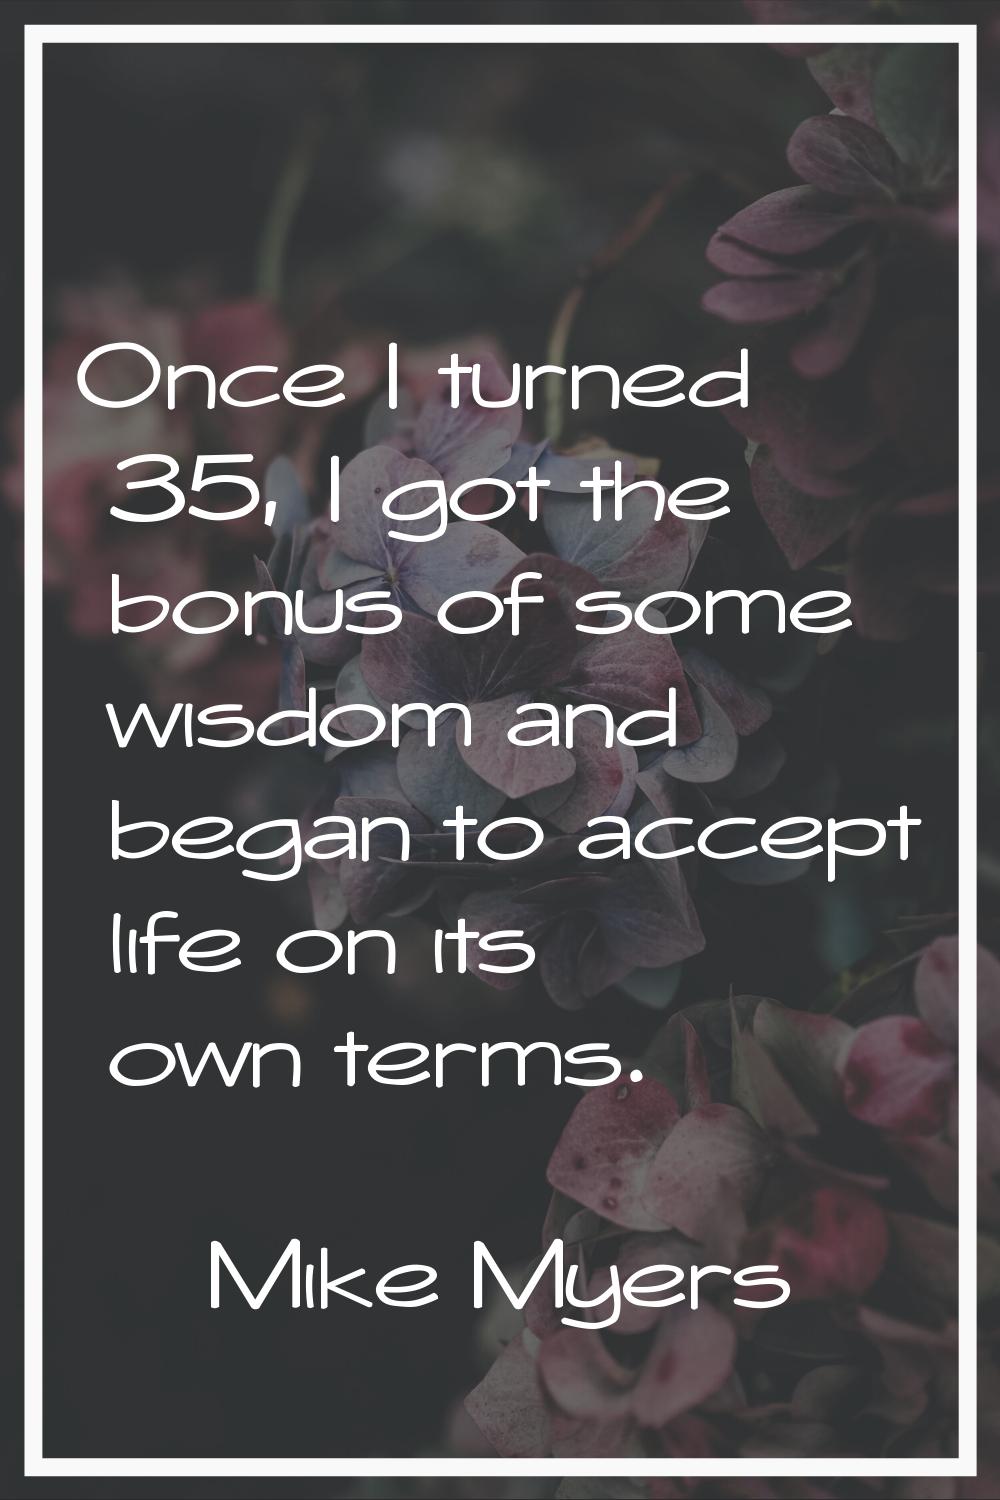 Once I turned 35, I got the bonus of some wisdom and began to accept life on its own terms.